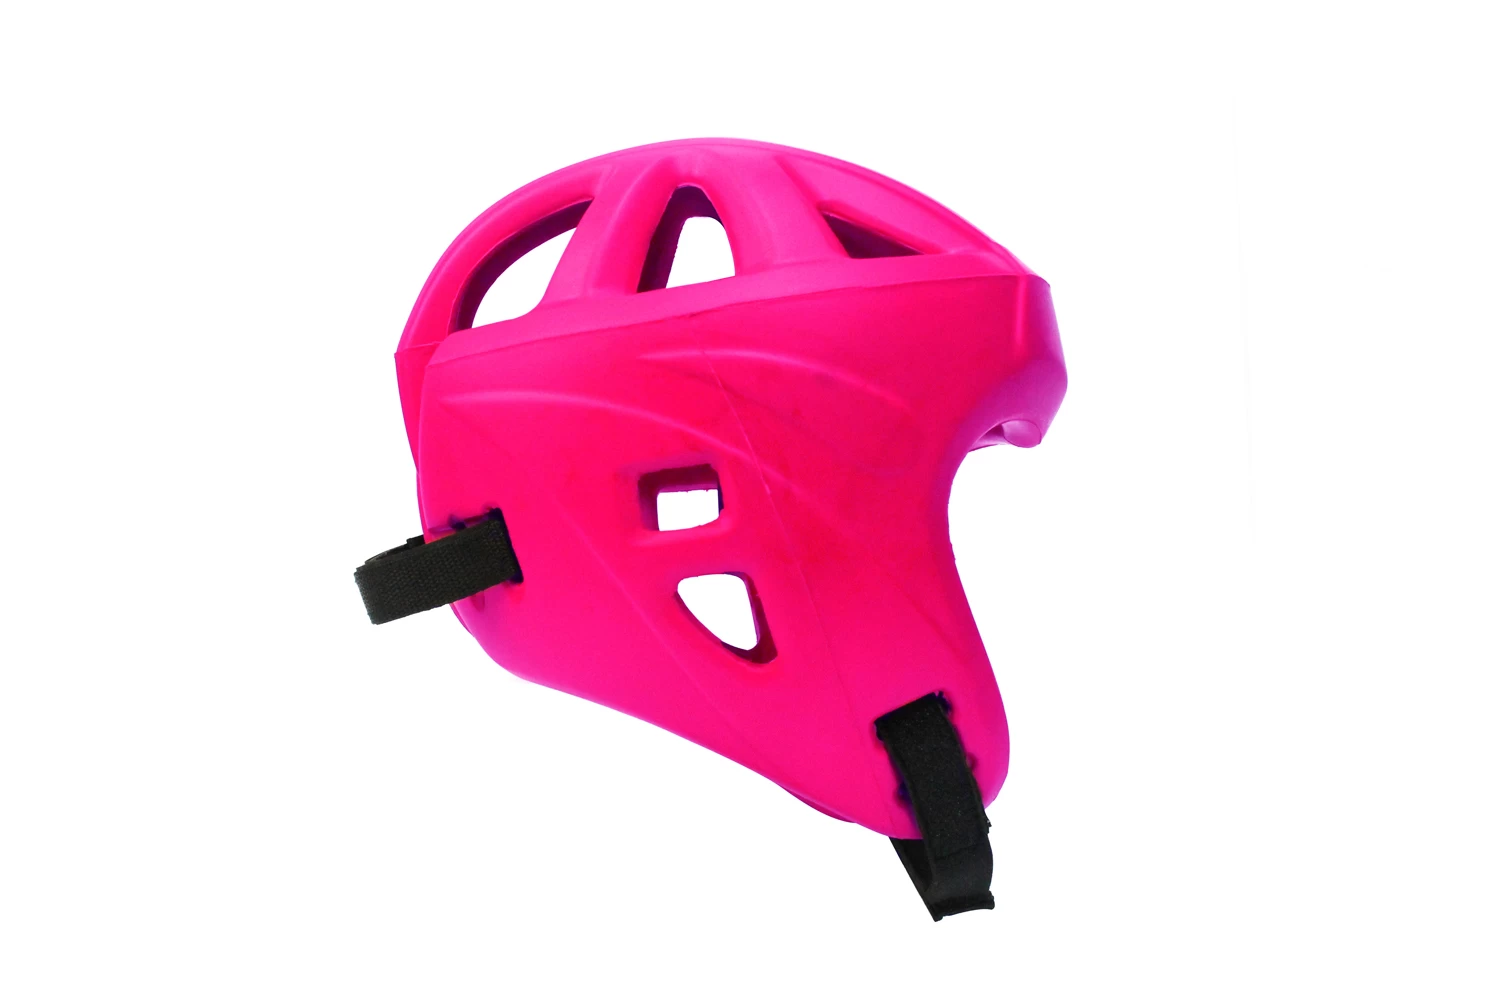 China China PU Polyurethane professional safety helmet supplier China head gear for boxing factory China helmet manufacturer fabrikant